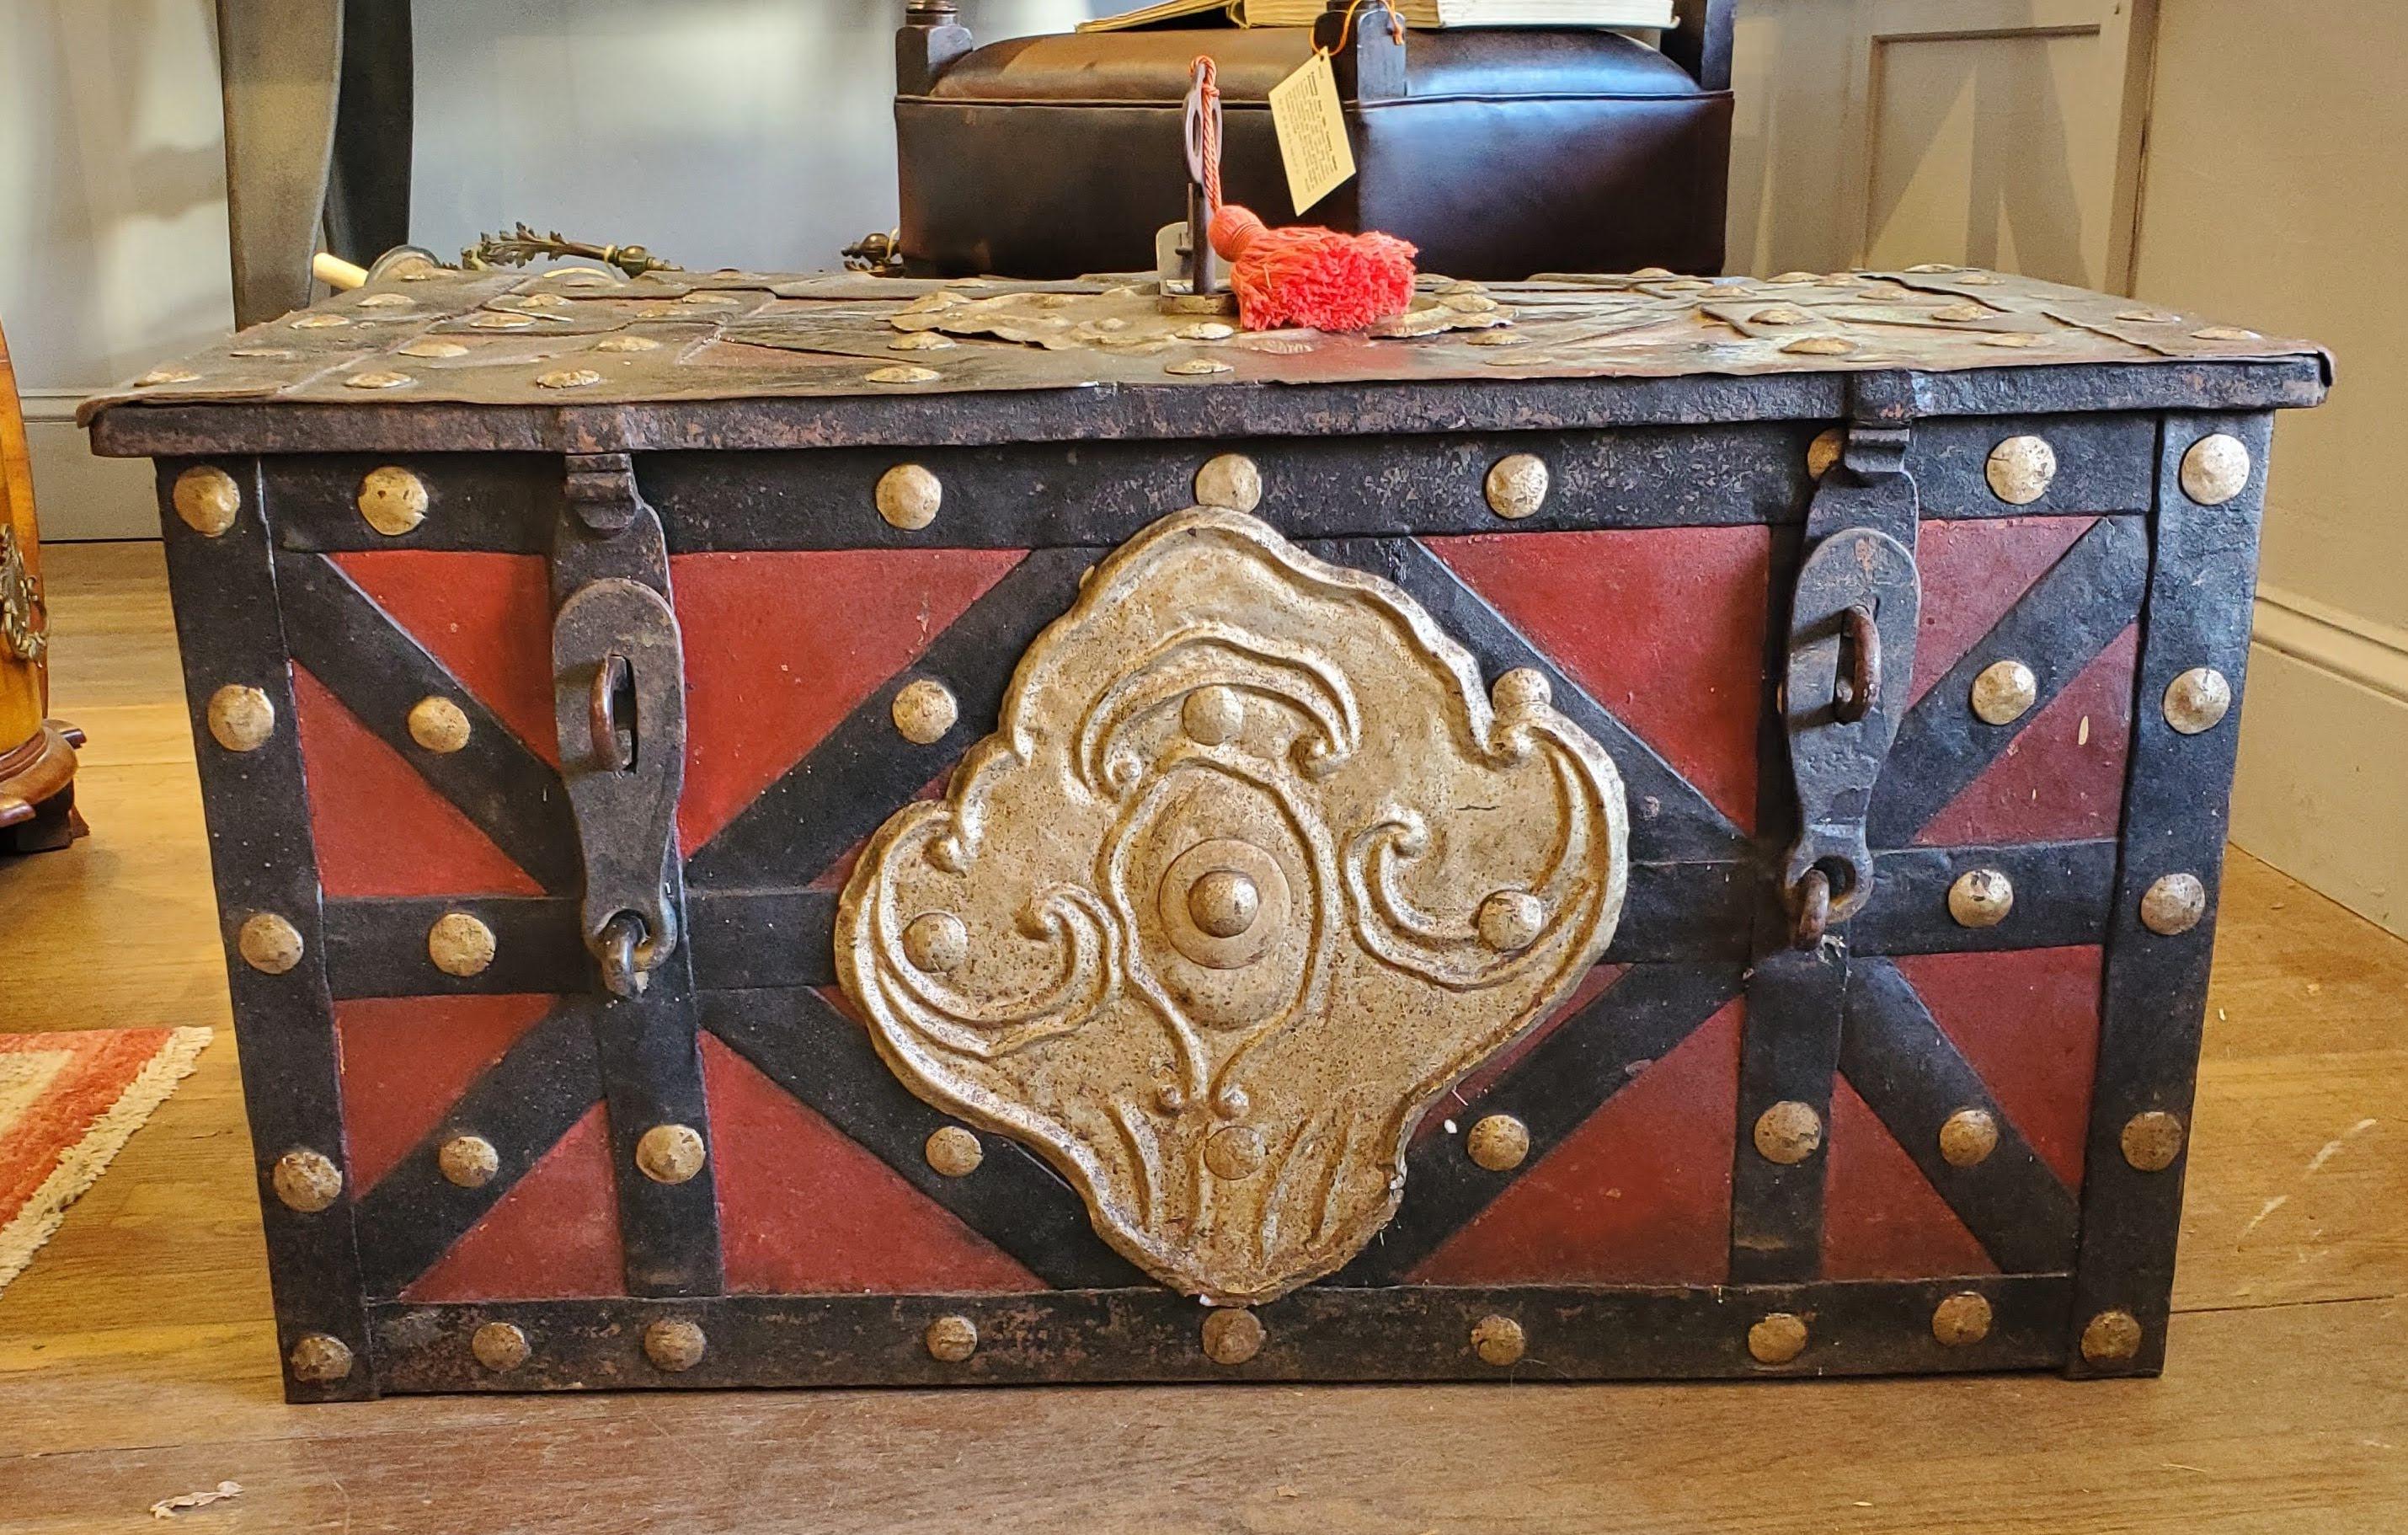 17th century Spanish “Armada” style iron strong box or treasure chest. This piece will make a terrific addition to your interior design project and you will have so much fun showing it off. The extraordinarily complicated mechanism clicks with such